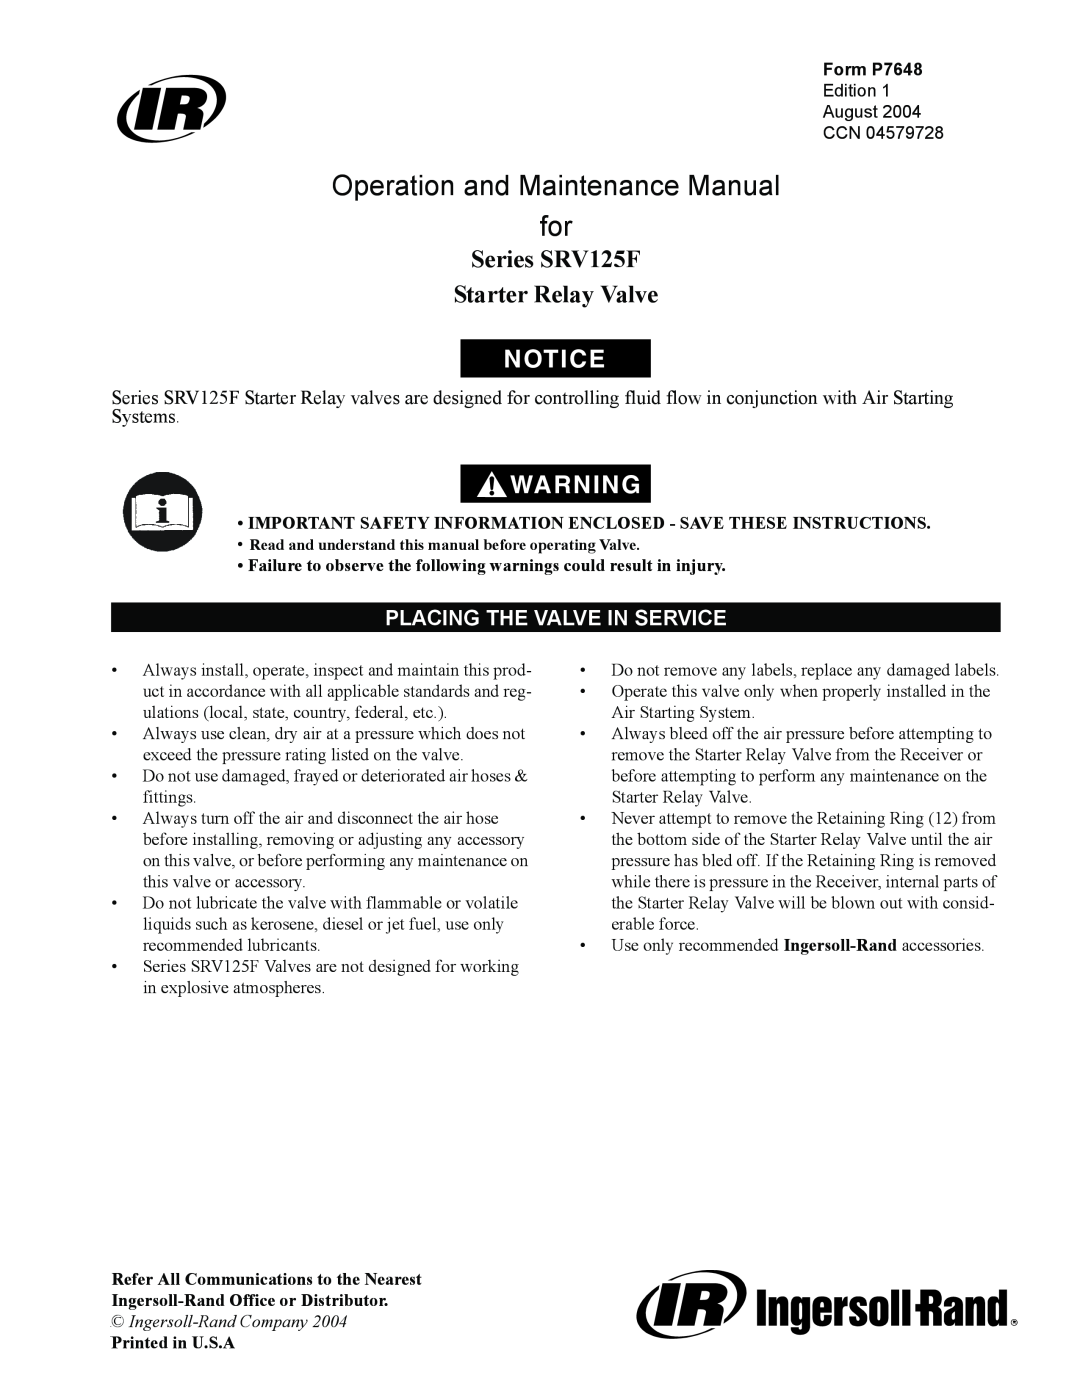 Ingersoll-Rand SRV125F manual Placing The Valve In Service, Form P7648, Operation and Maintenance Manual for 